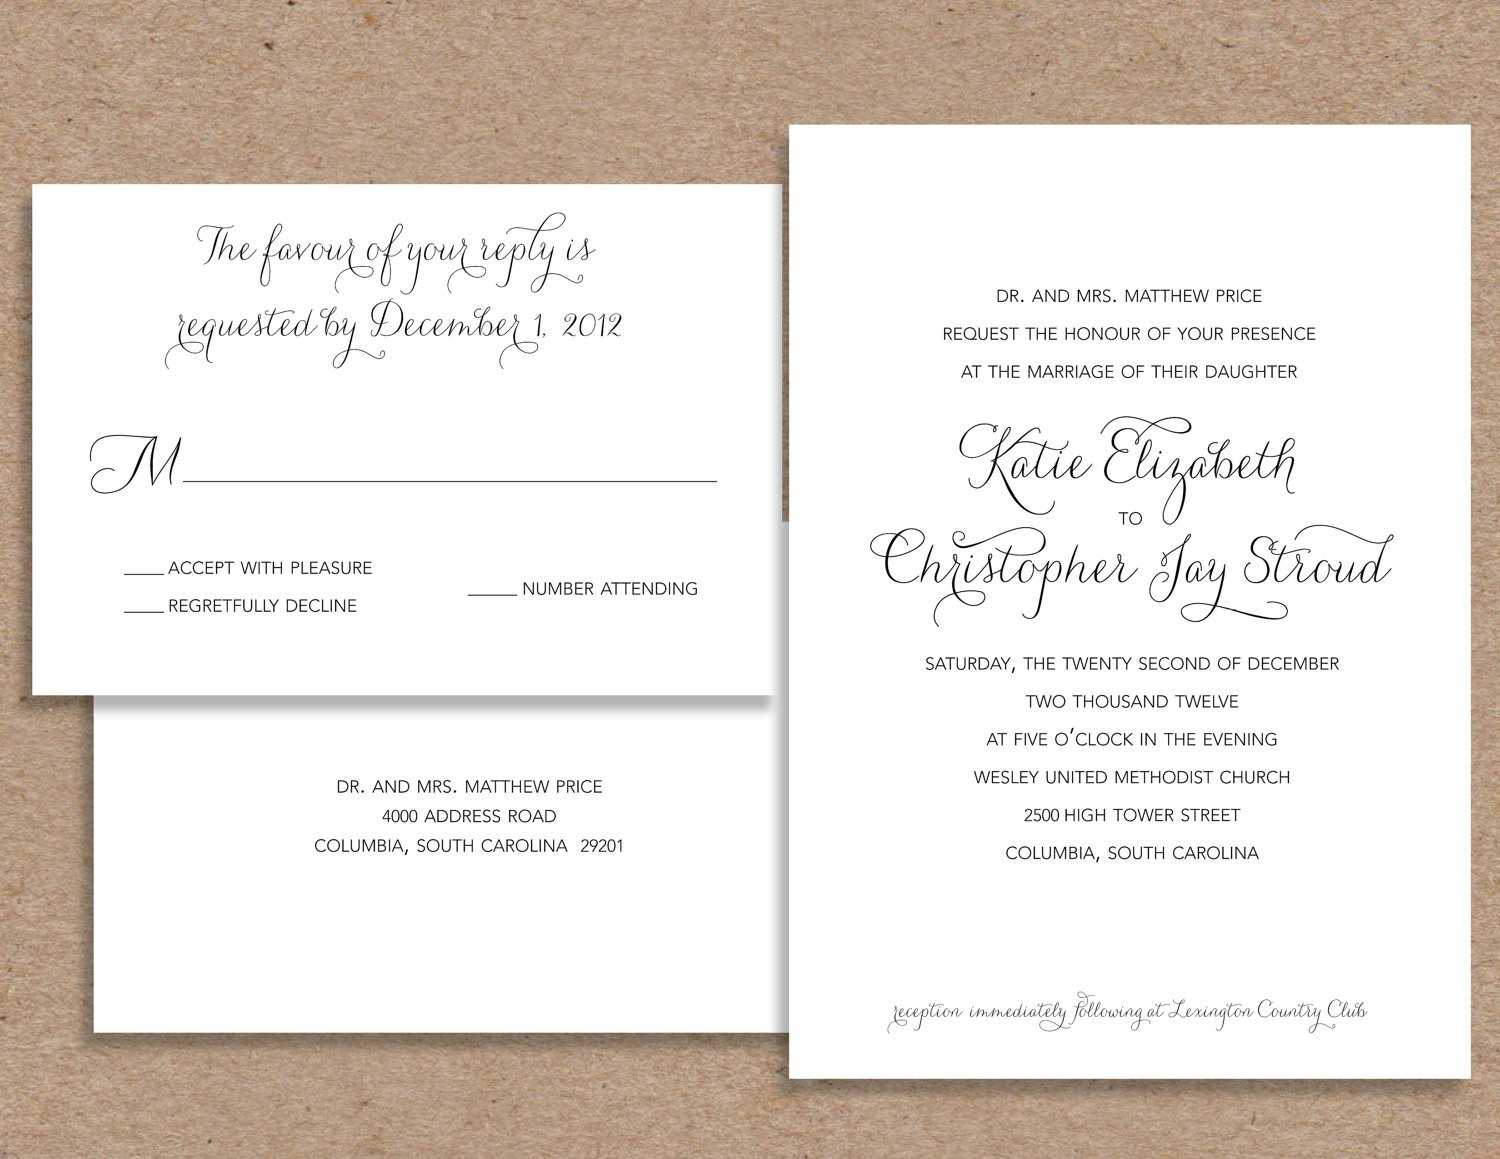 Wedding Invitation Acceptance Letter | Invitation Templates Throughout Acceptance Card Template